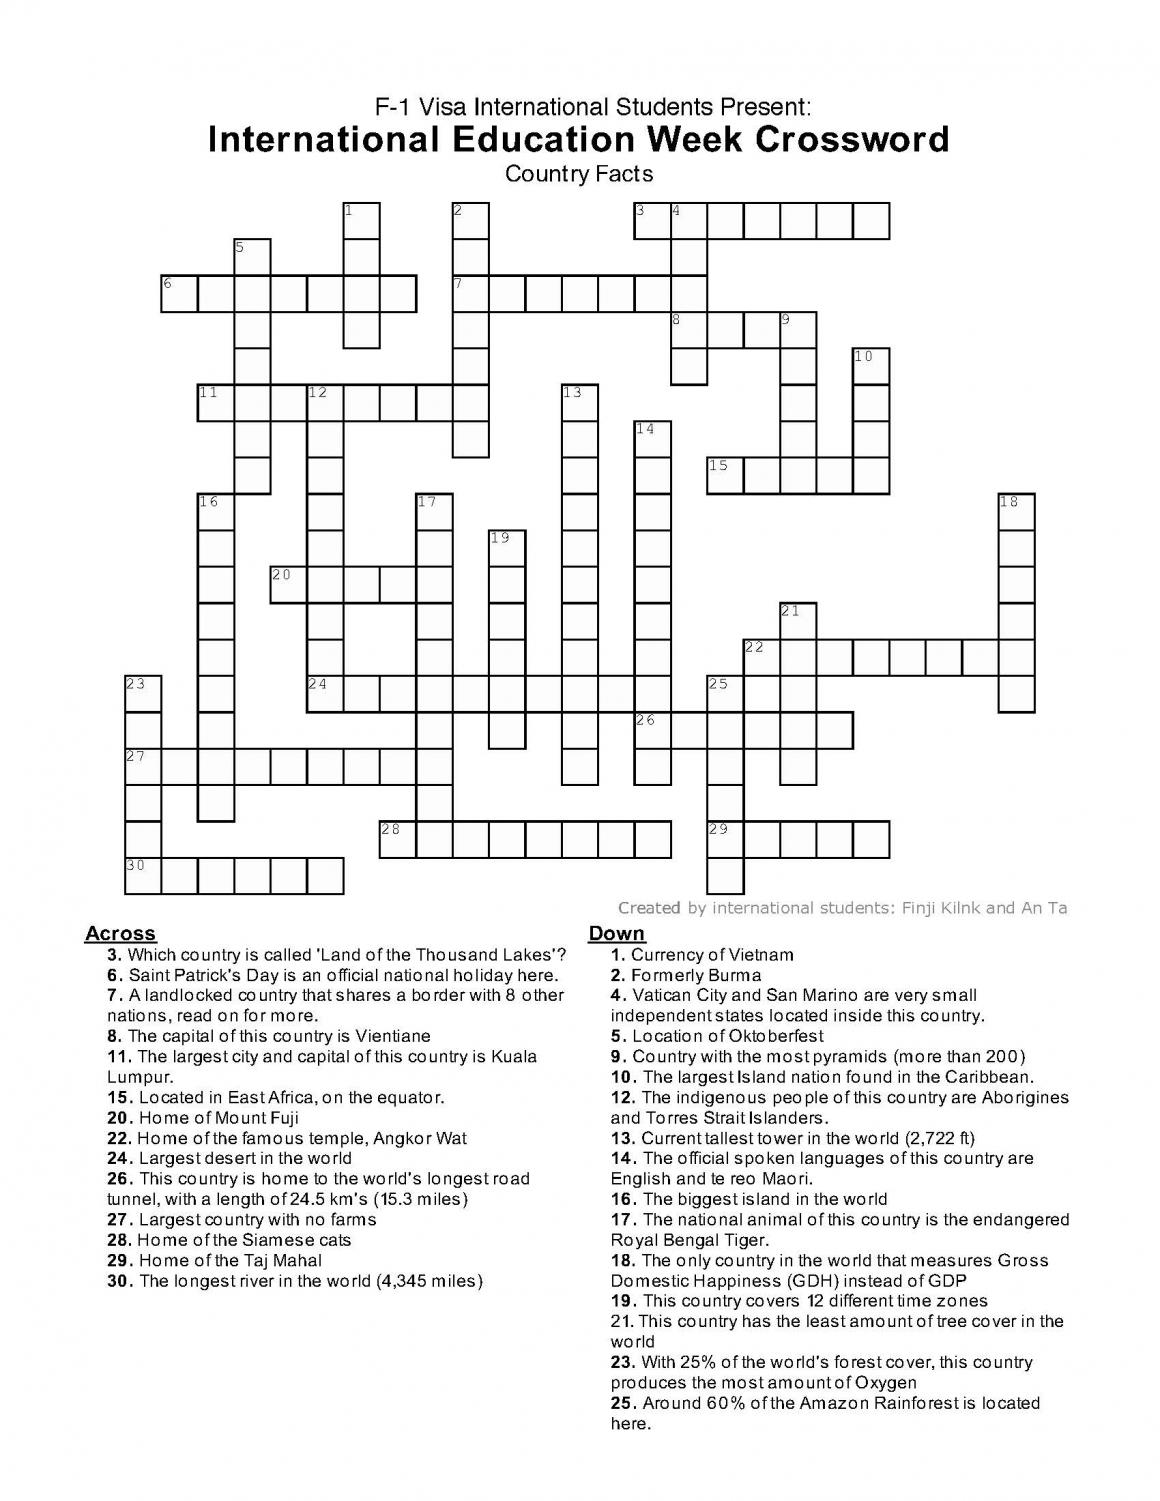 Need a break? Try this crossword puzzle put together by El Camino s